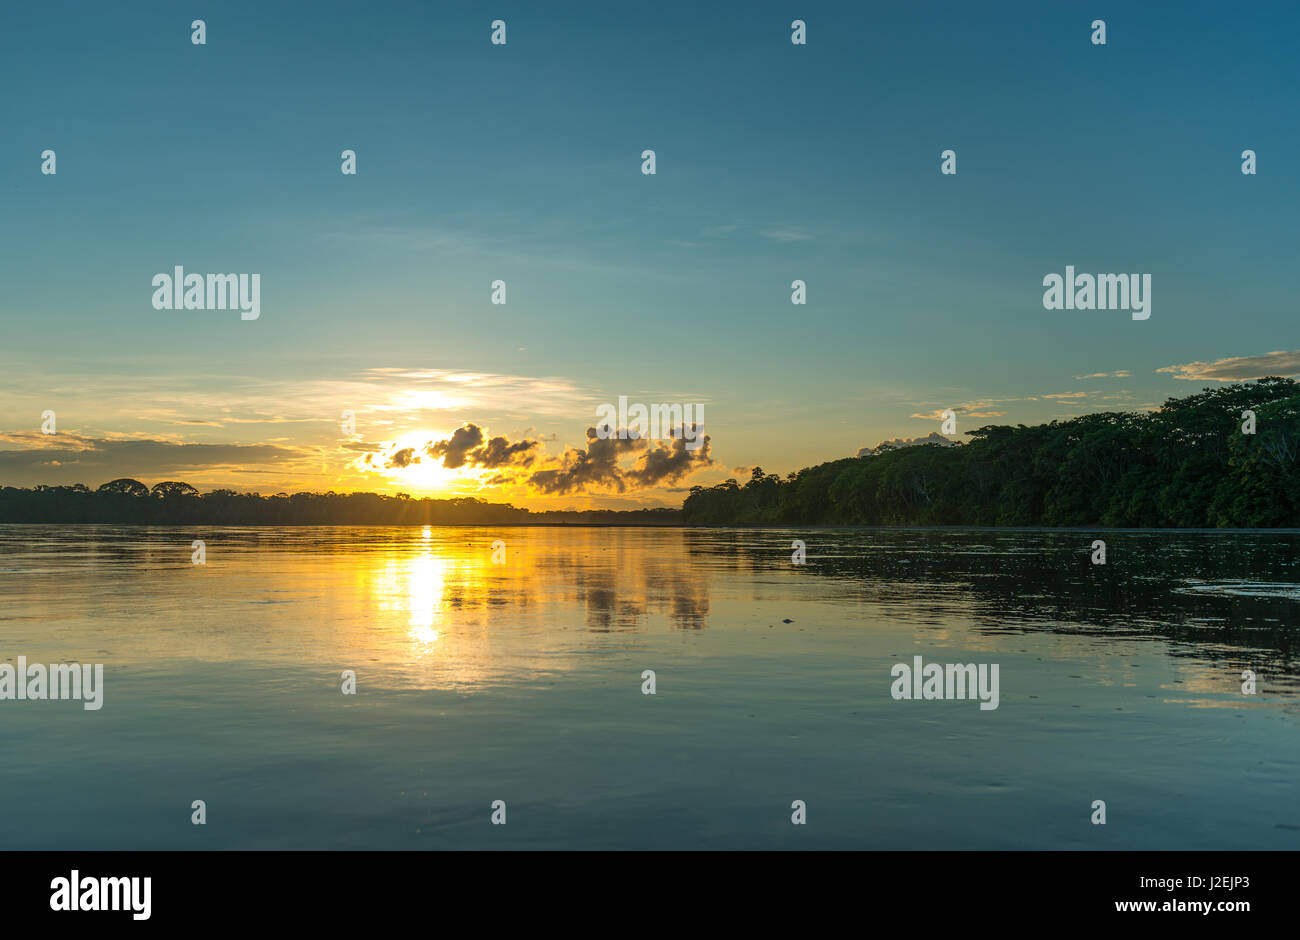 Sunset on the Amazon river during a boat trip with a reflection of the trees in the water. Stock Photo